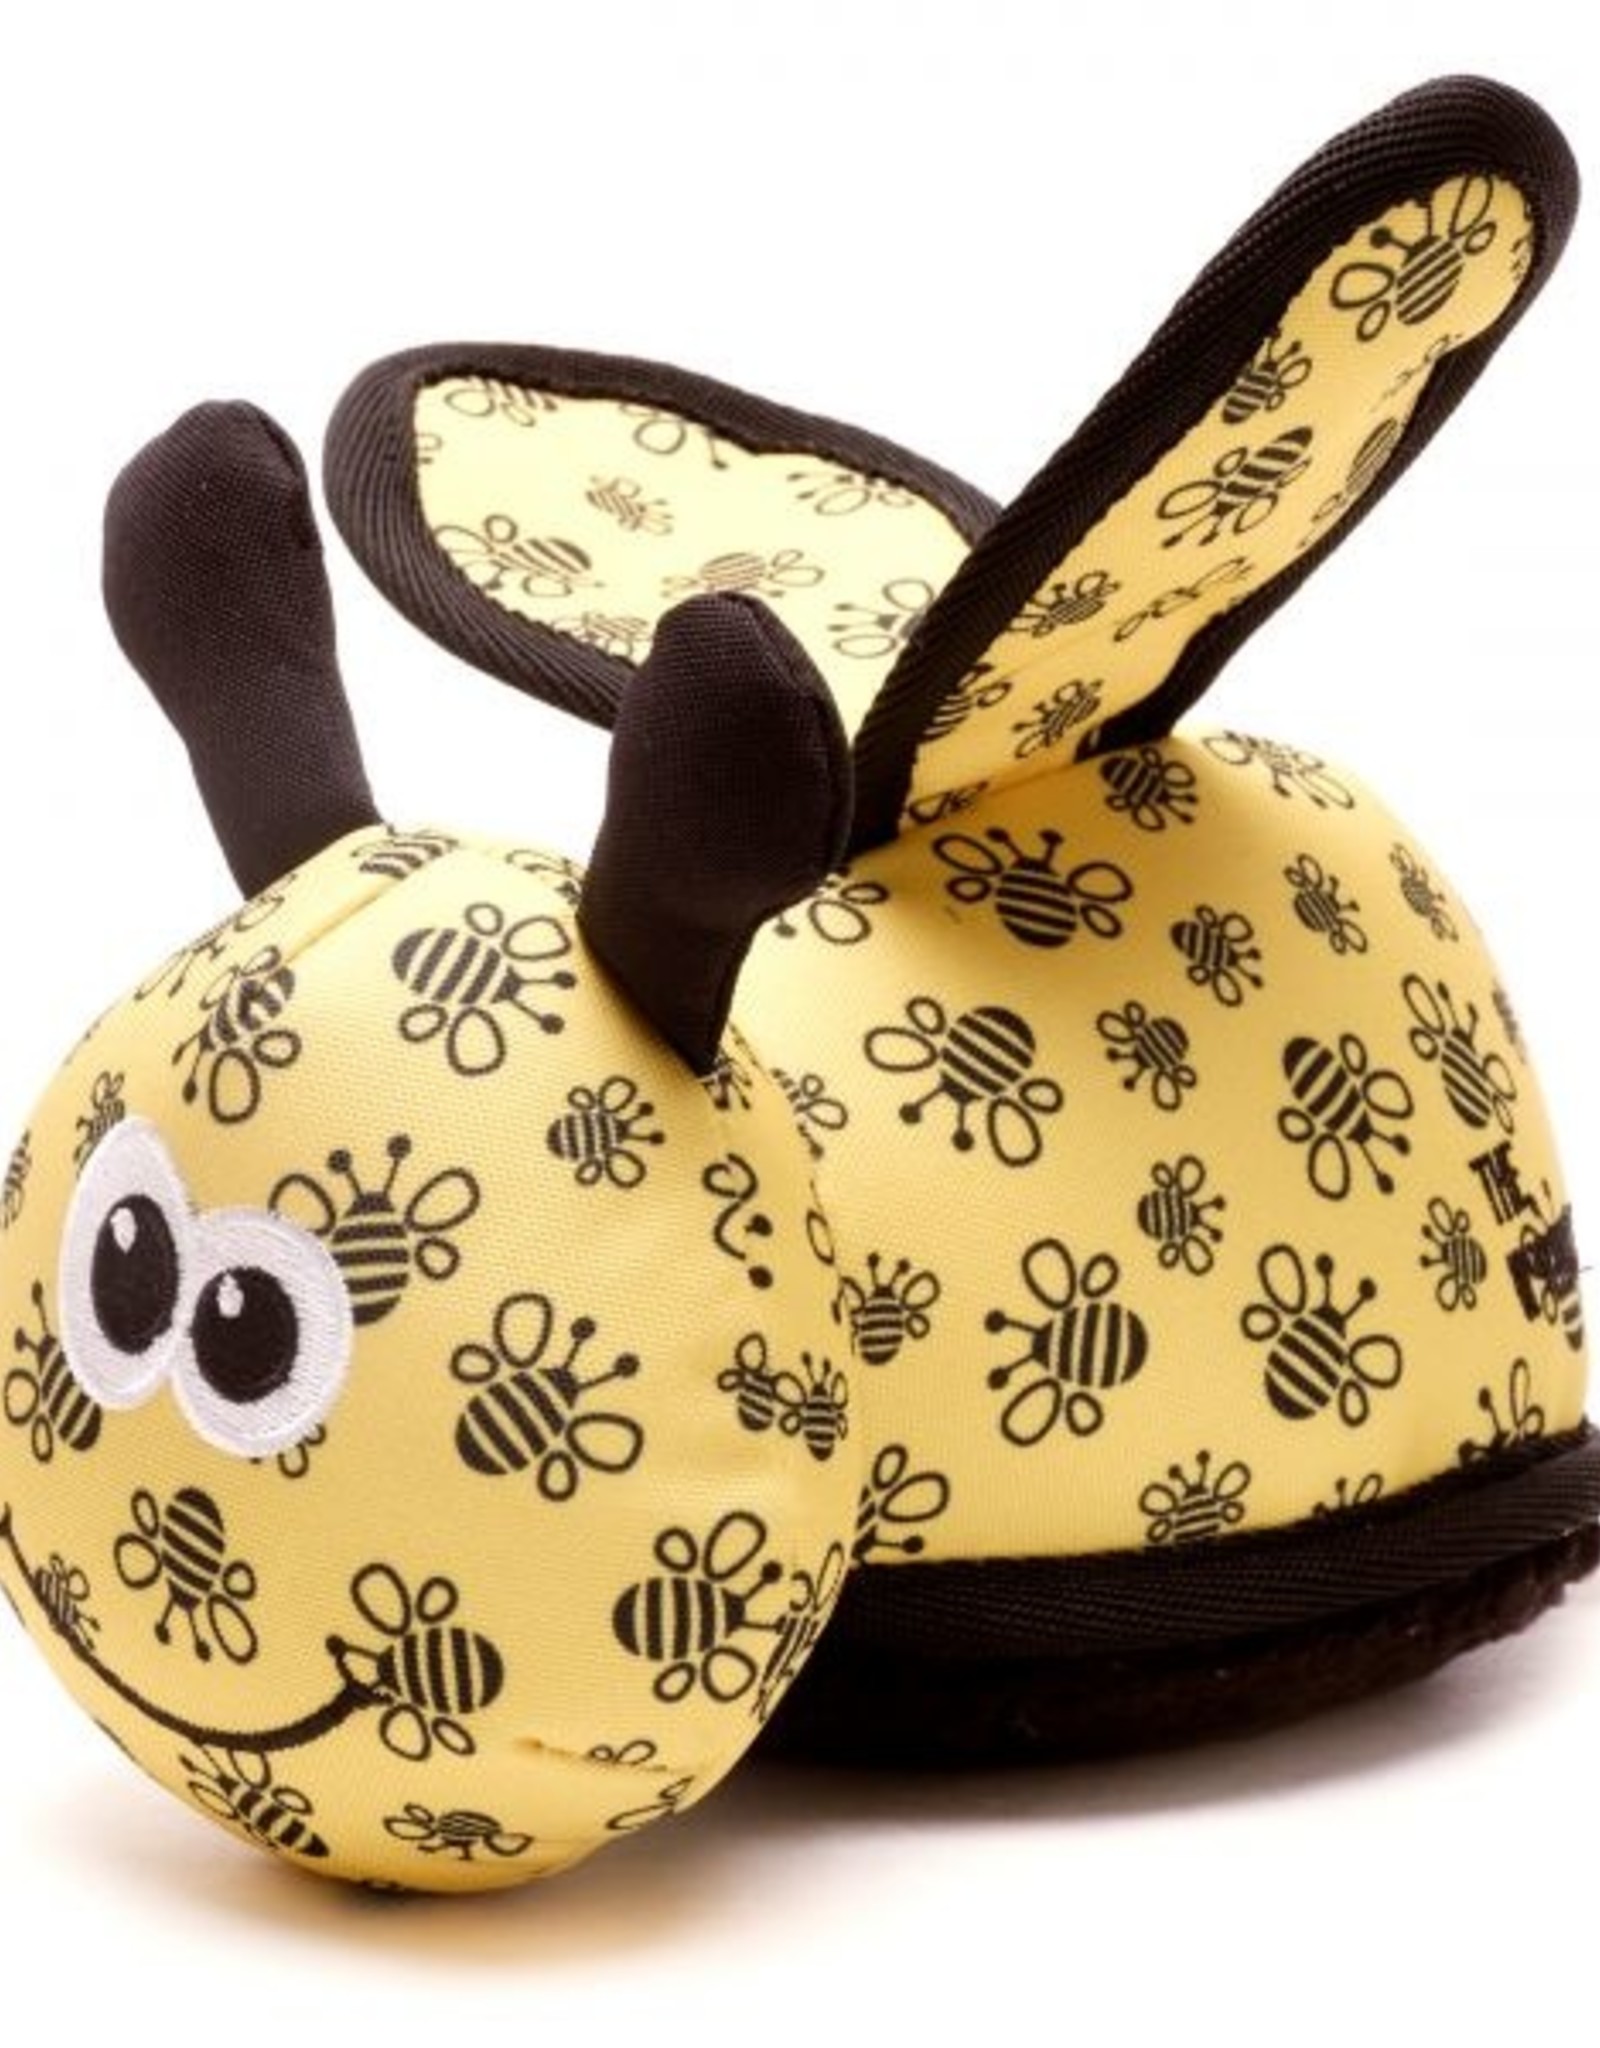 The Worthy Dog - Busy Bee Toy